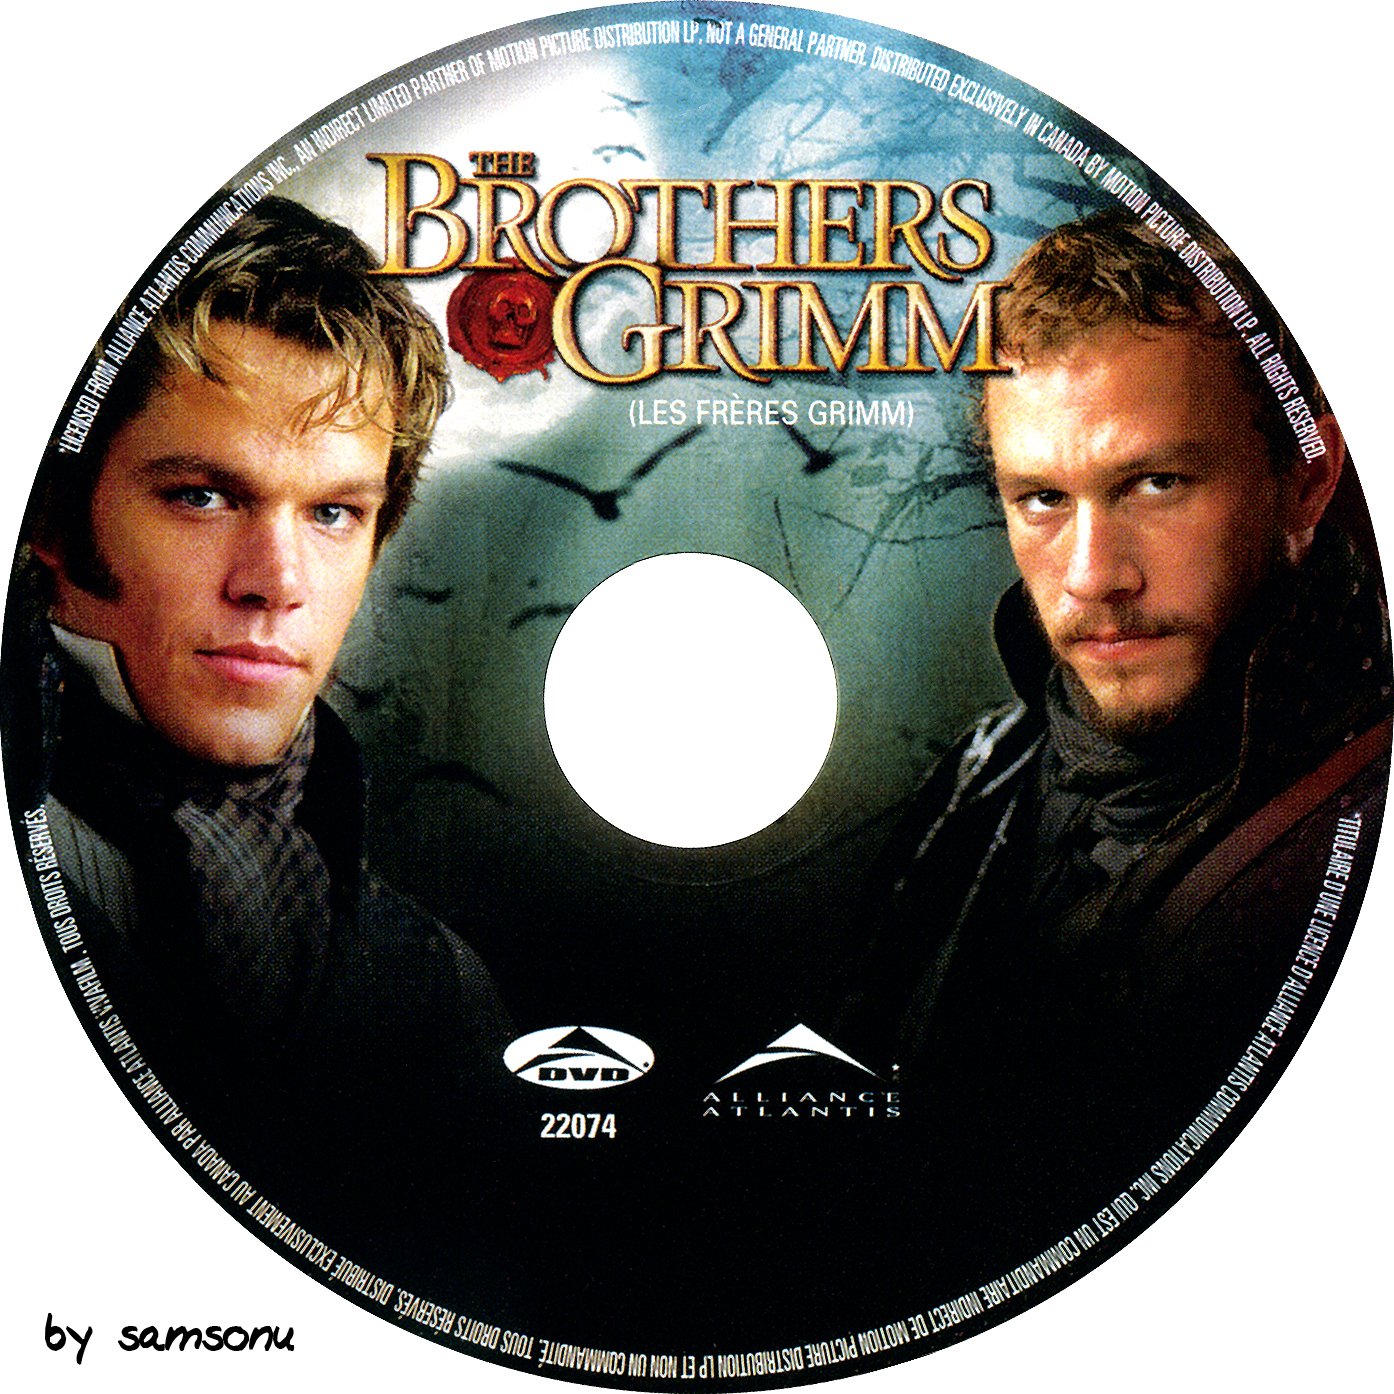 Brothers grimm 2005